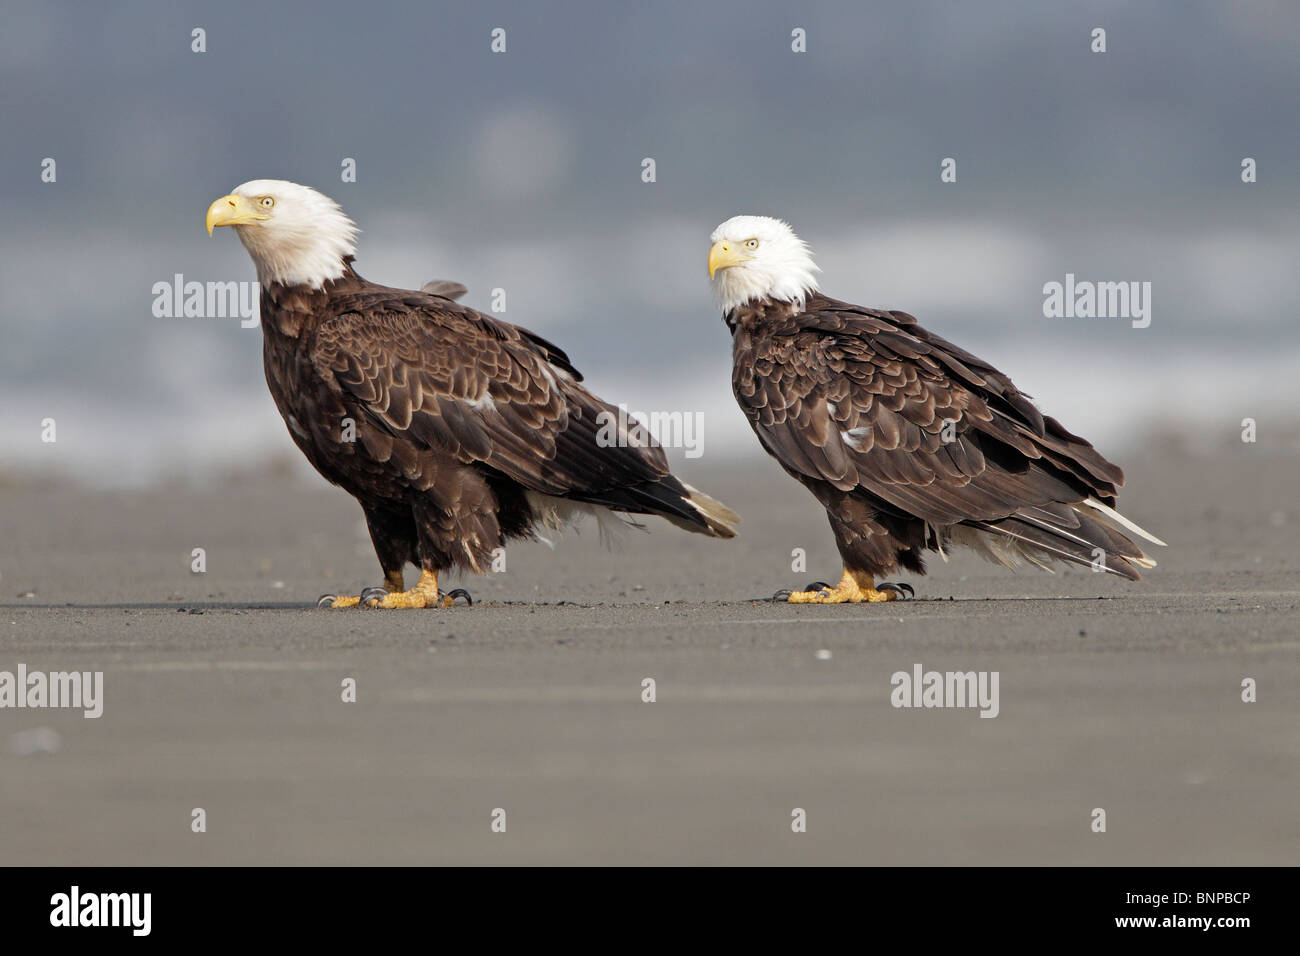 A pair of Adult bald Eagle on a beach Stock Photo